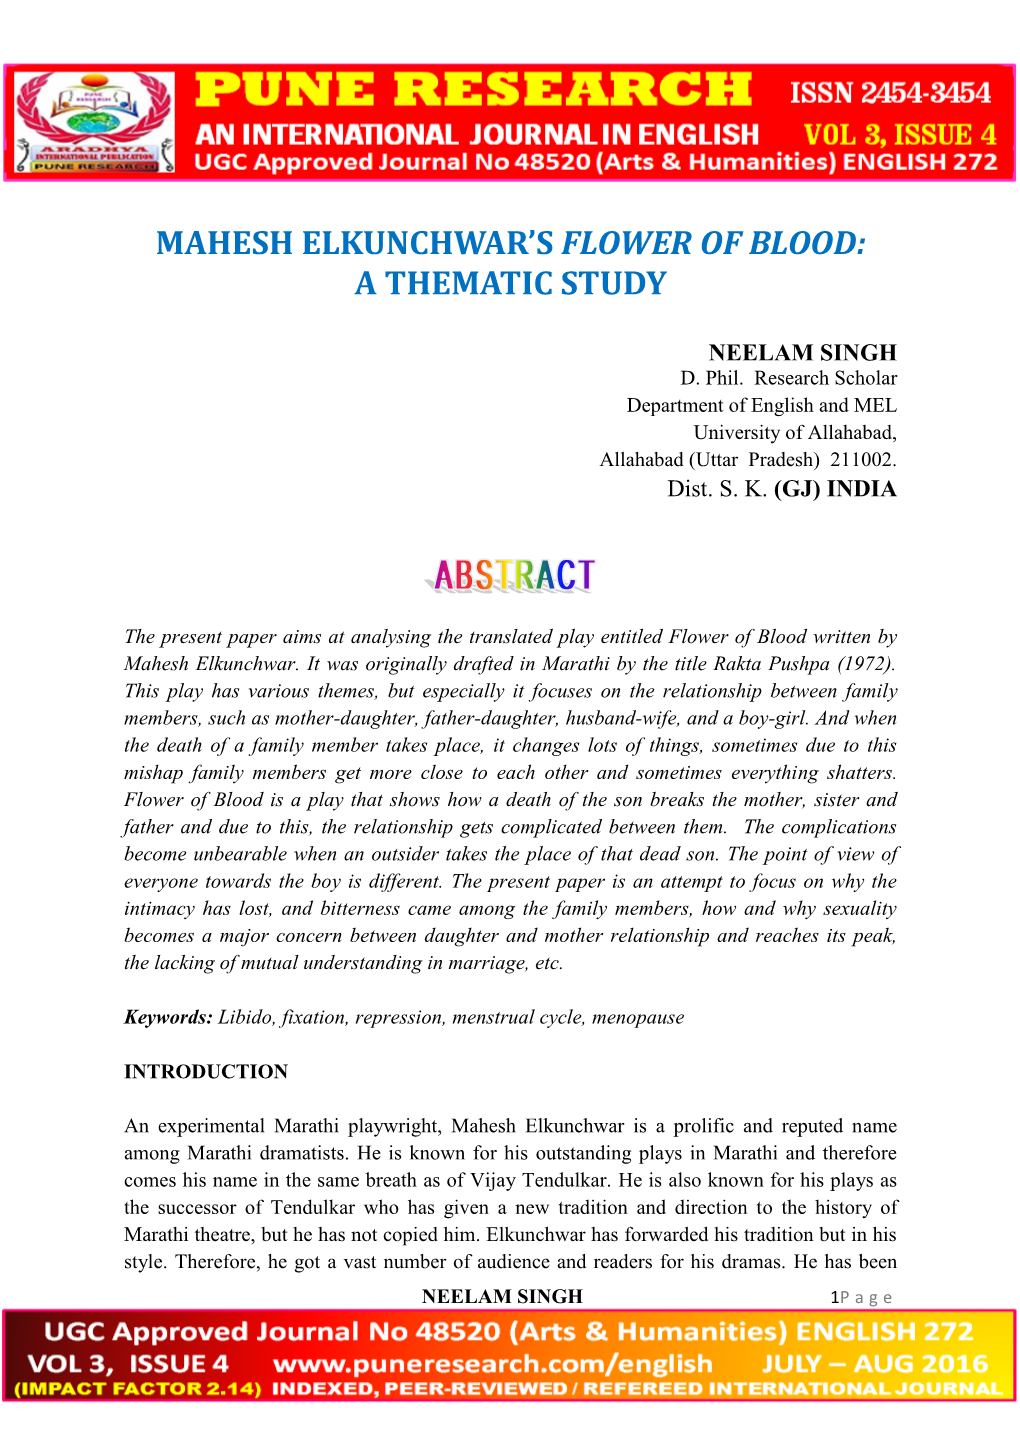 Mahesh Elkunchwar's Flower of Blood: a Thematic Study